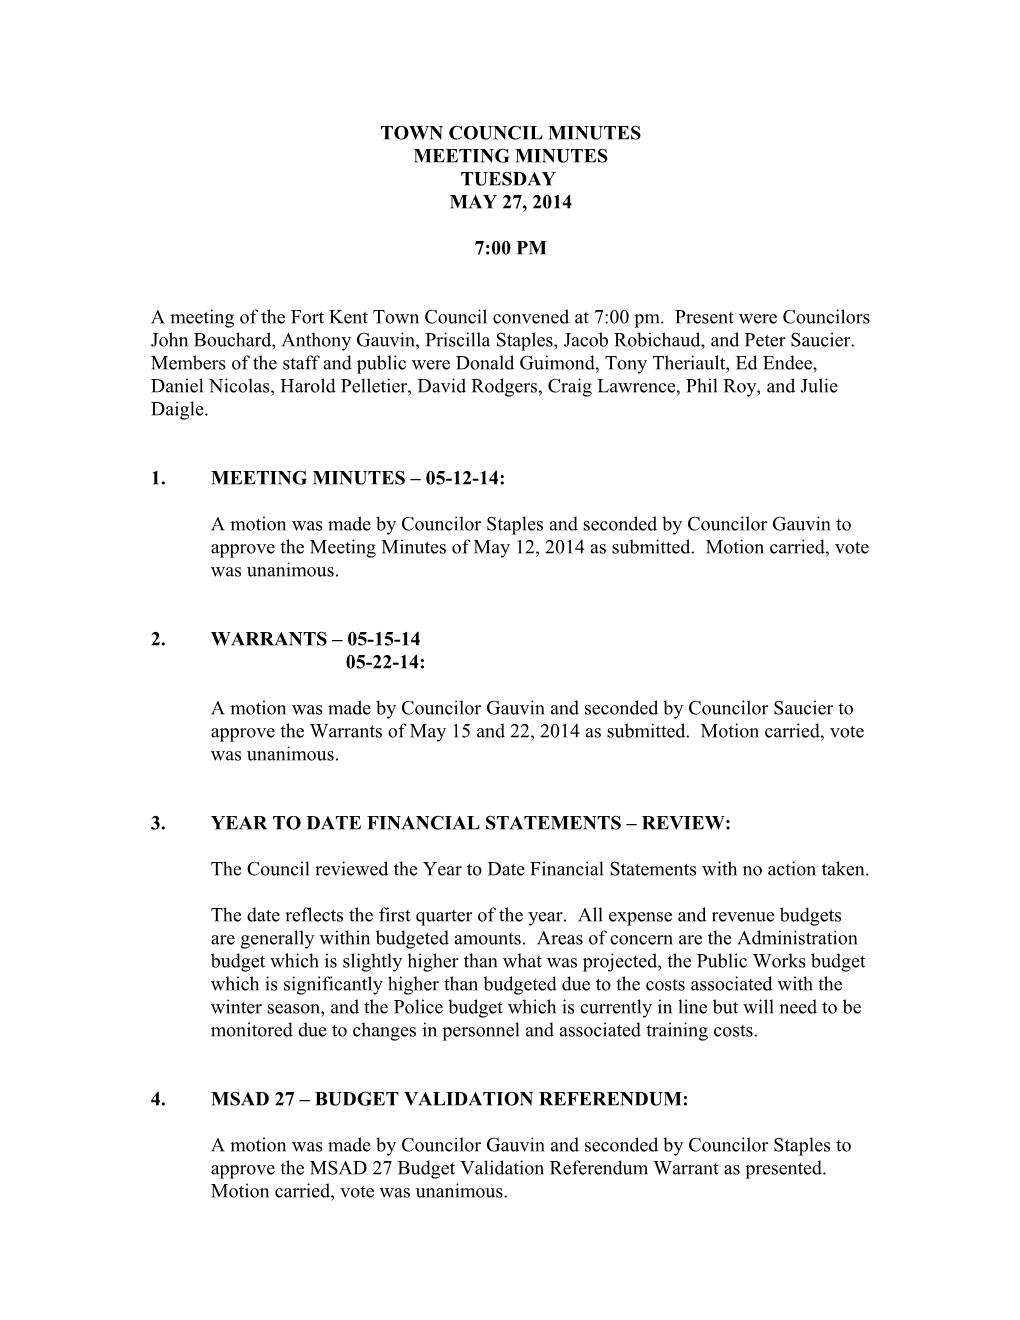 Town Council Minutes s4